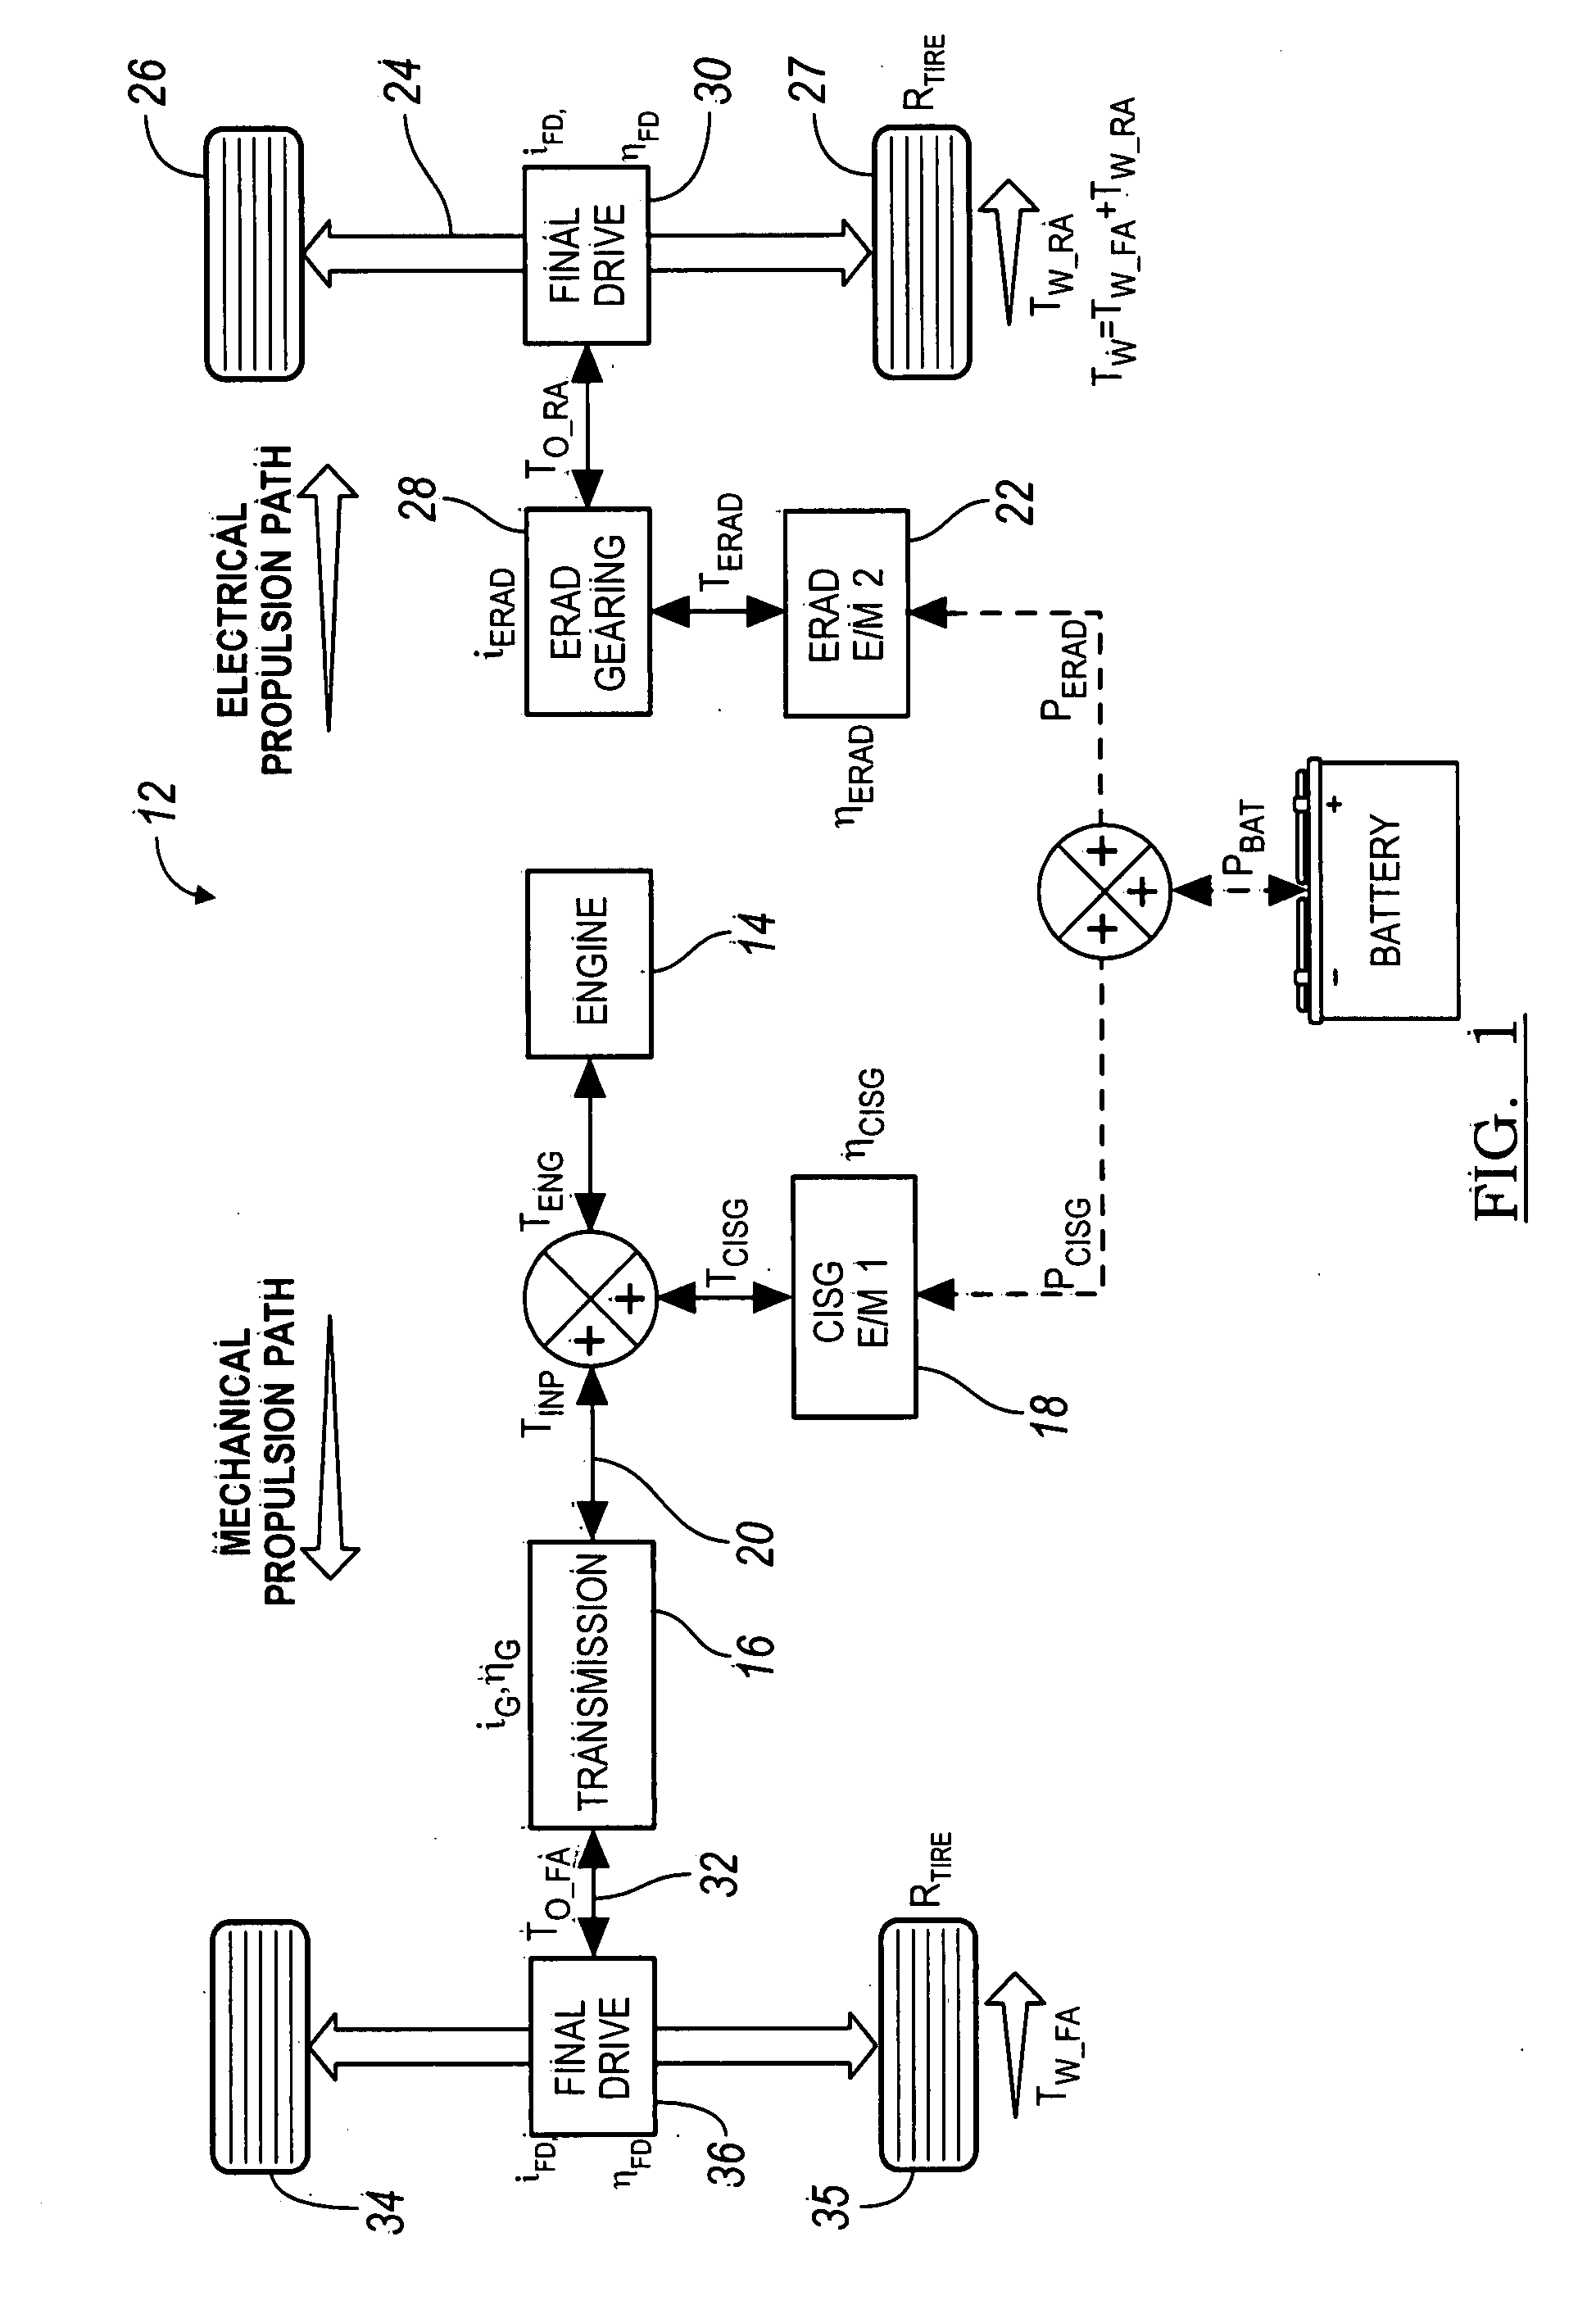 Launch control of a hybrid electric vehicle